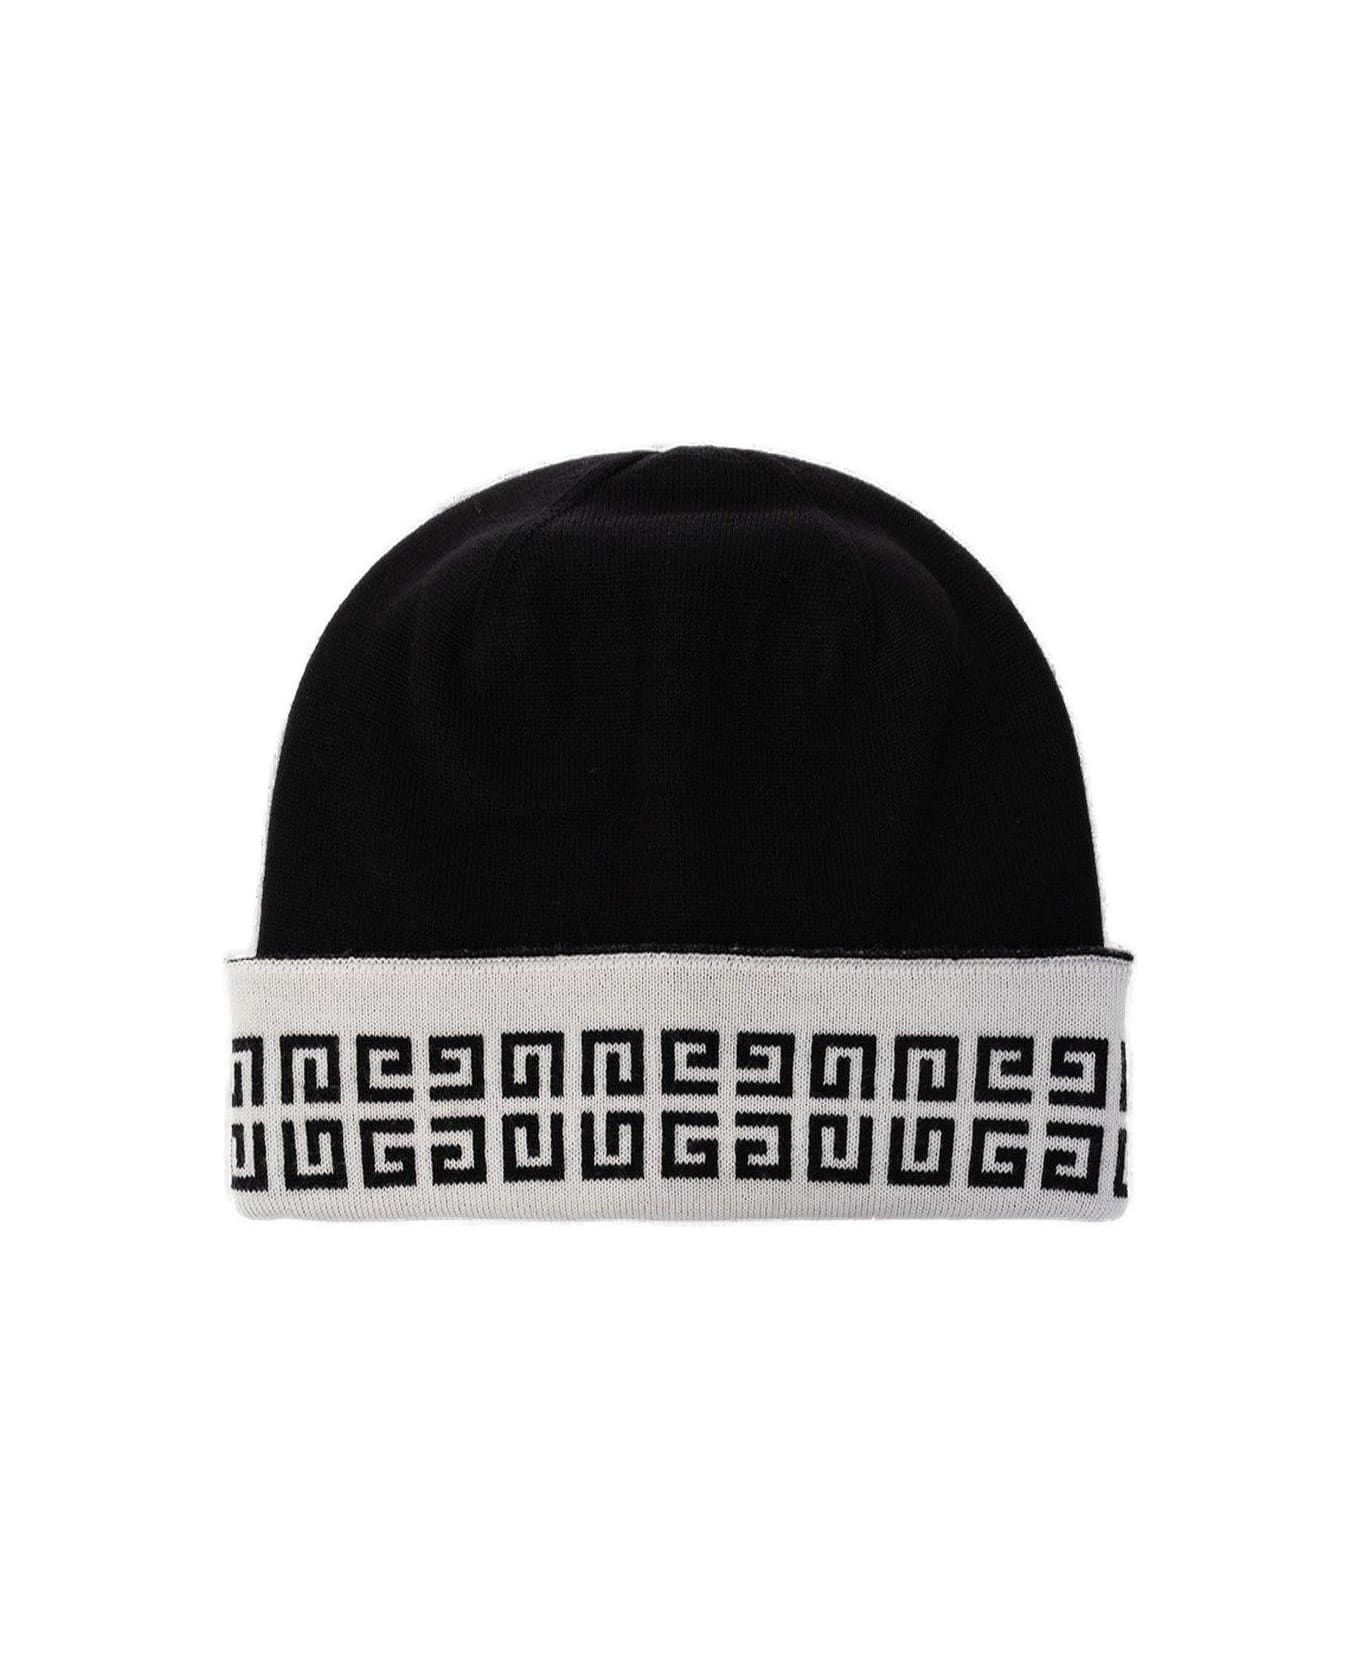 Givenchy 4g Monogrammed Knit Beanie